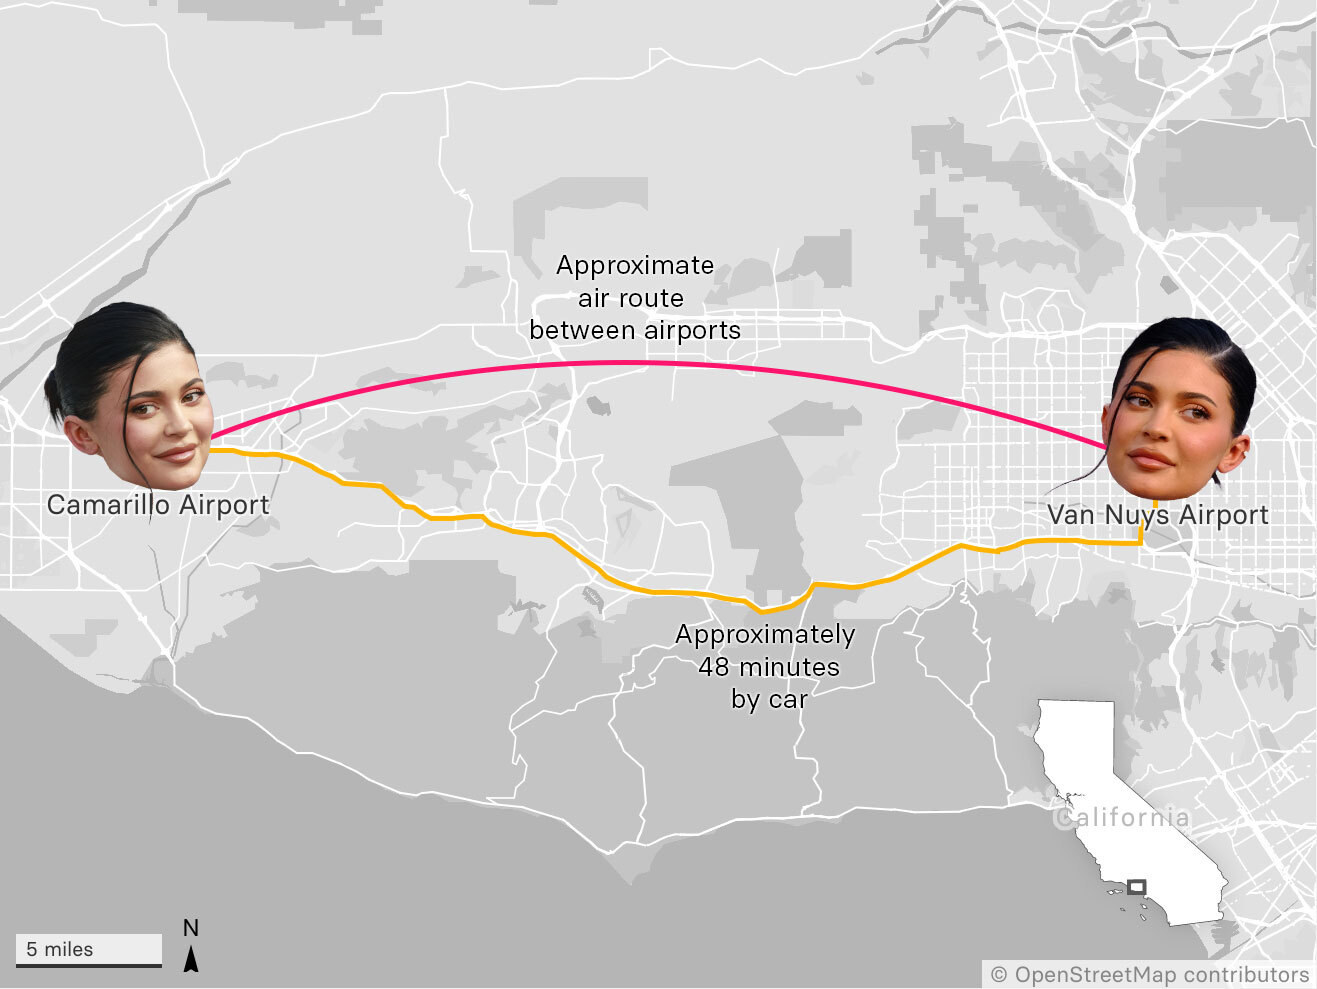 A map showing the shorter route the plane ride would have taken from Camarillo Airport to Van Nuys Airport vs driving